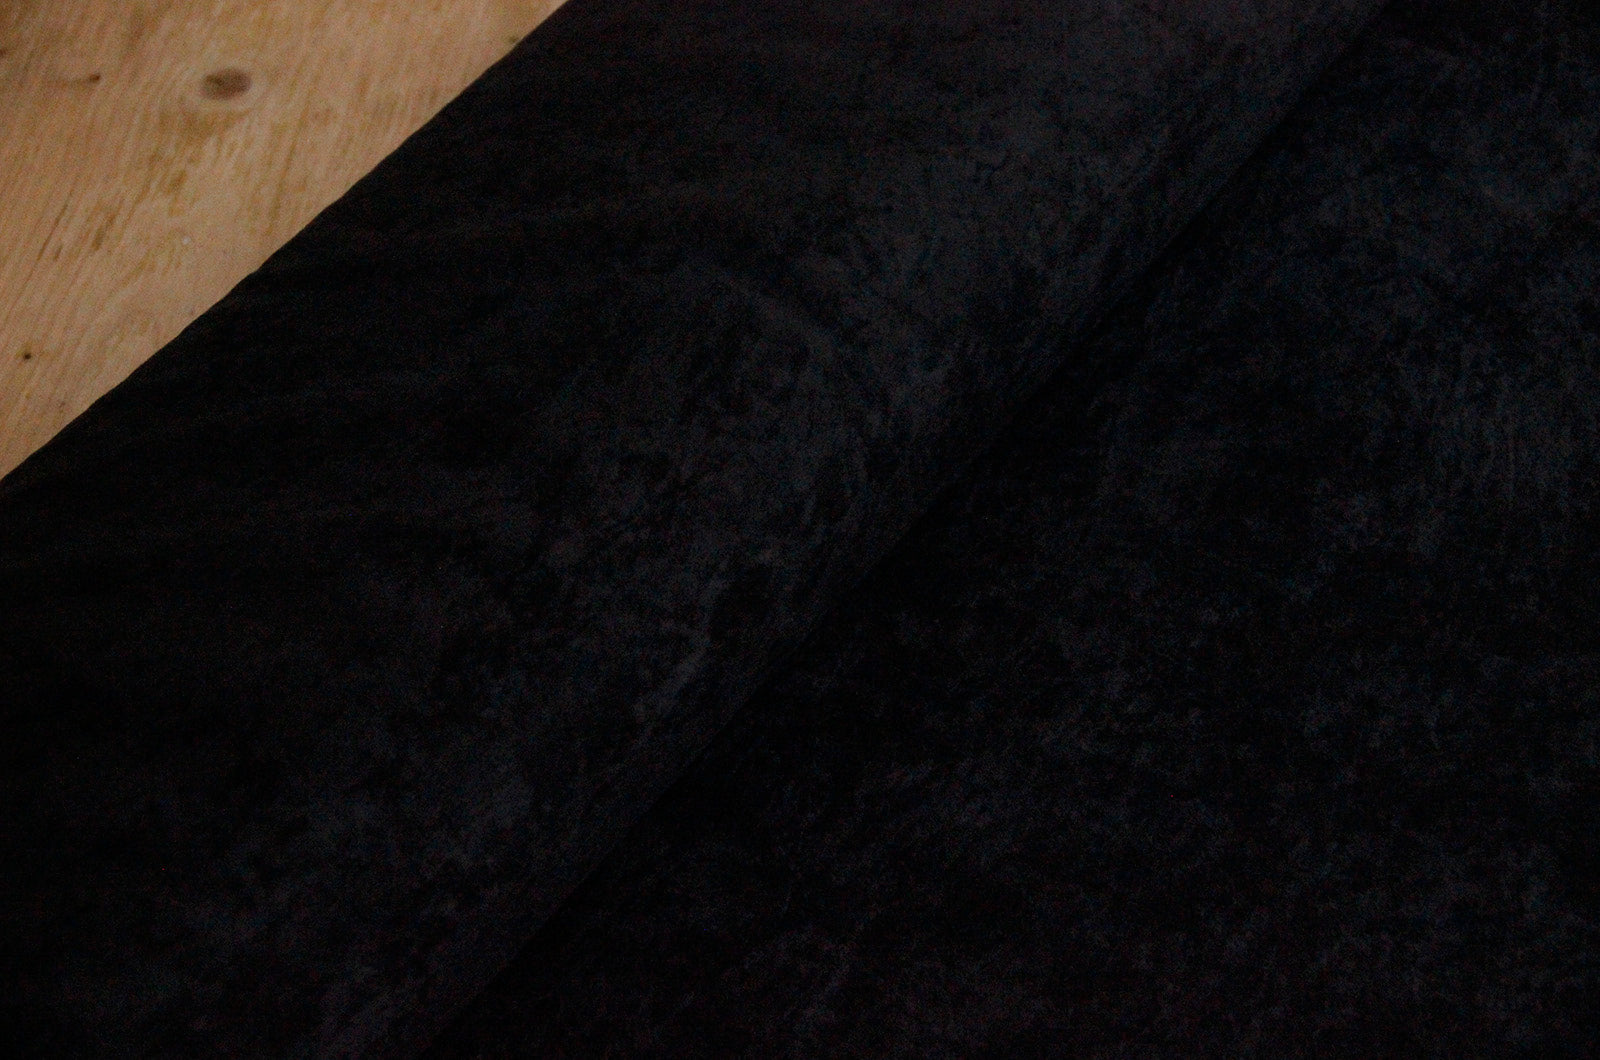 Imitation suede *From 50cm